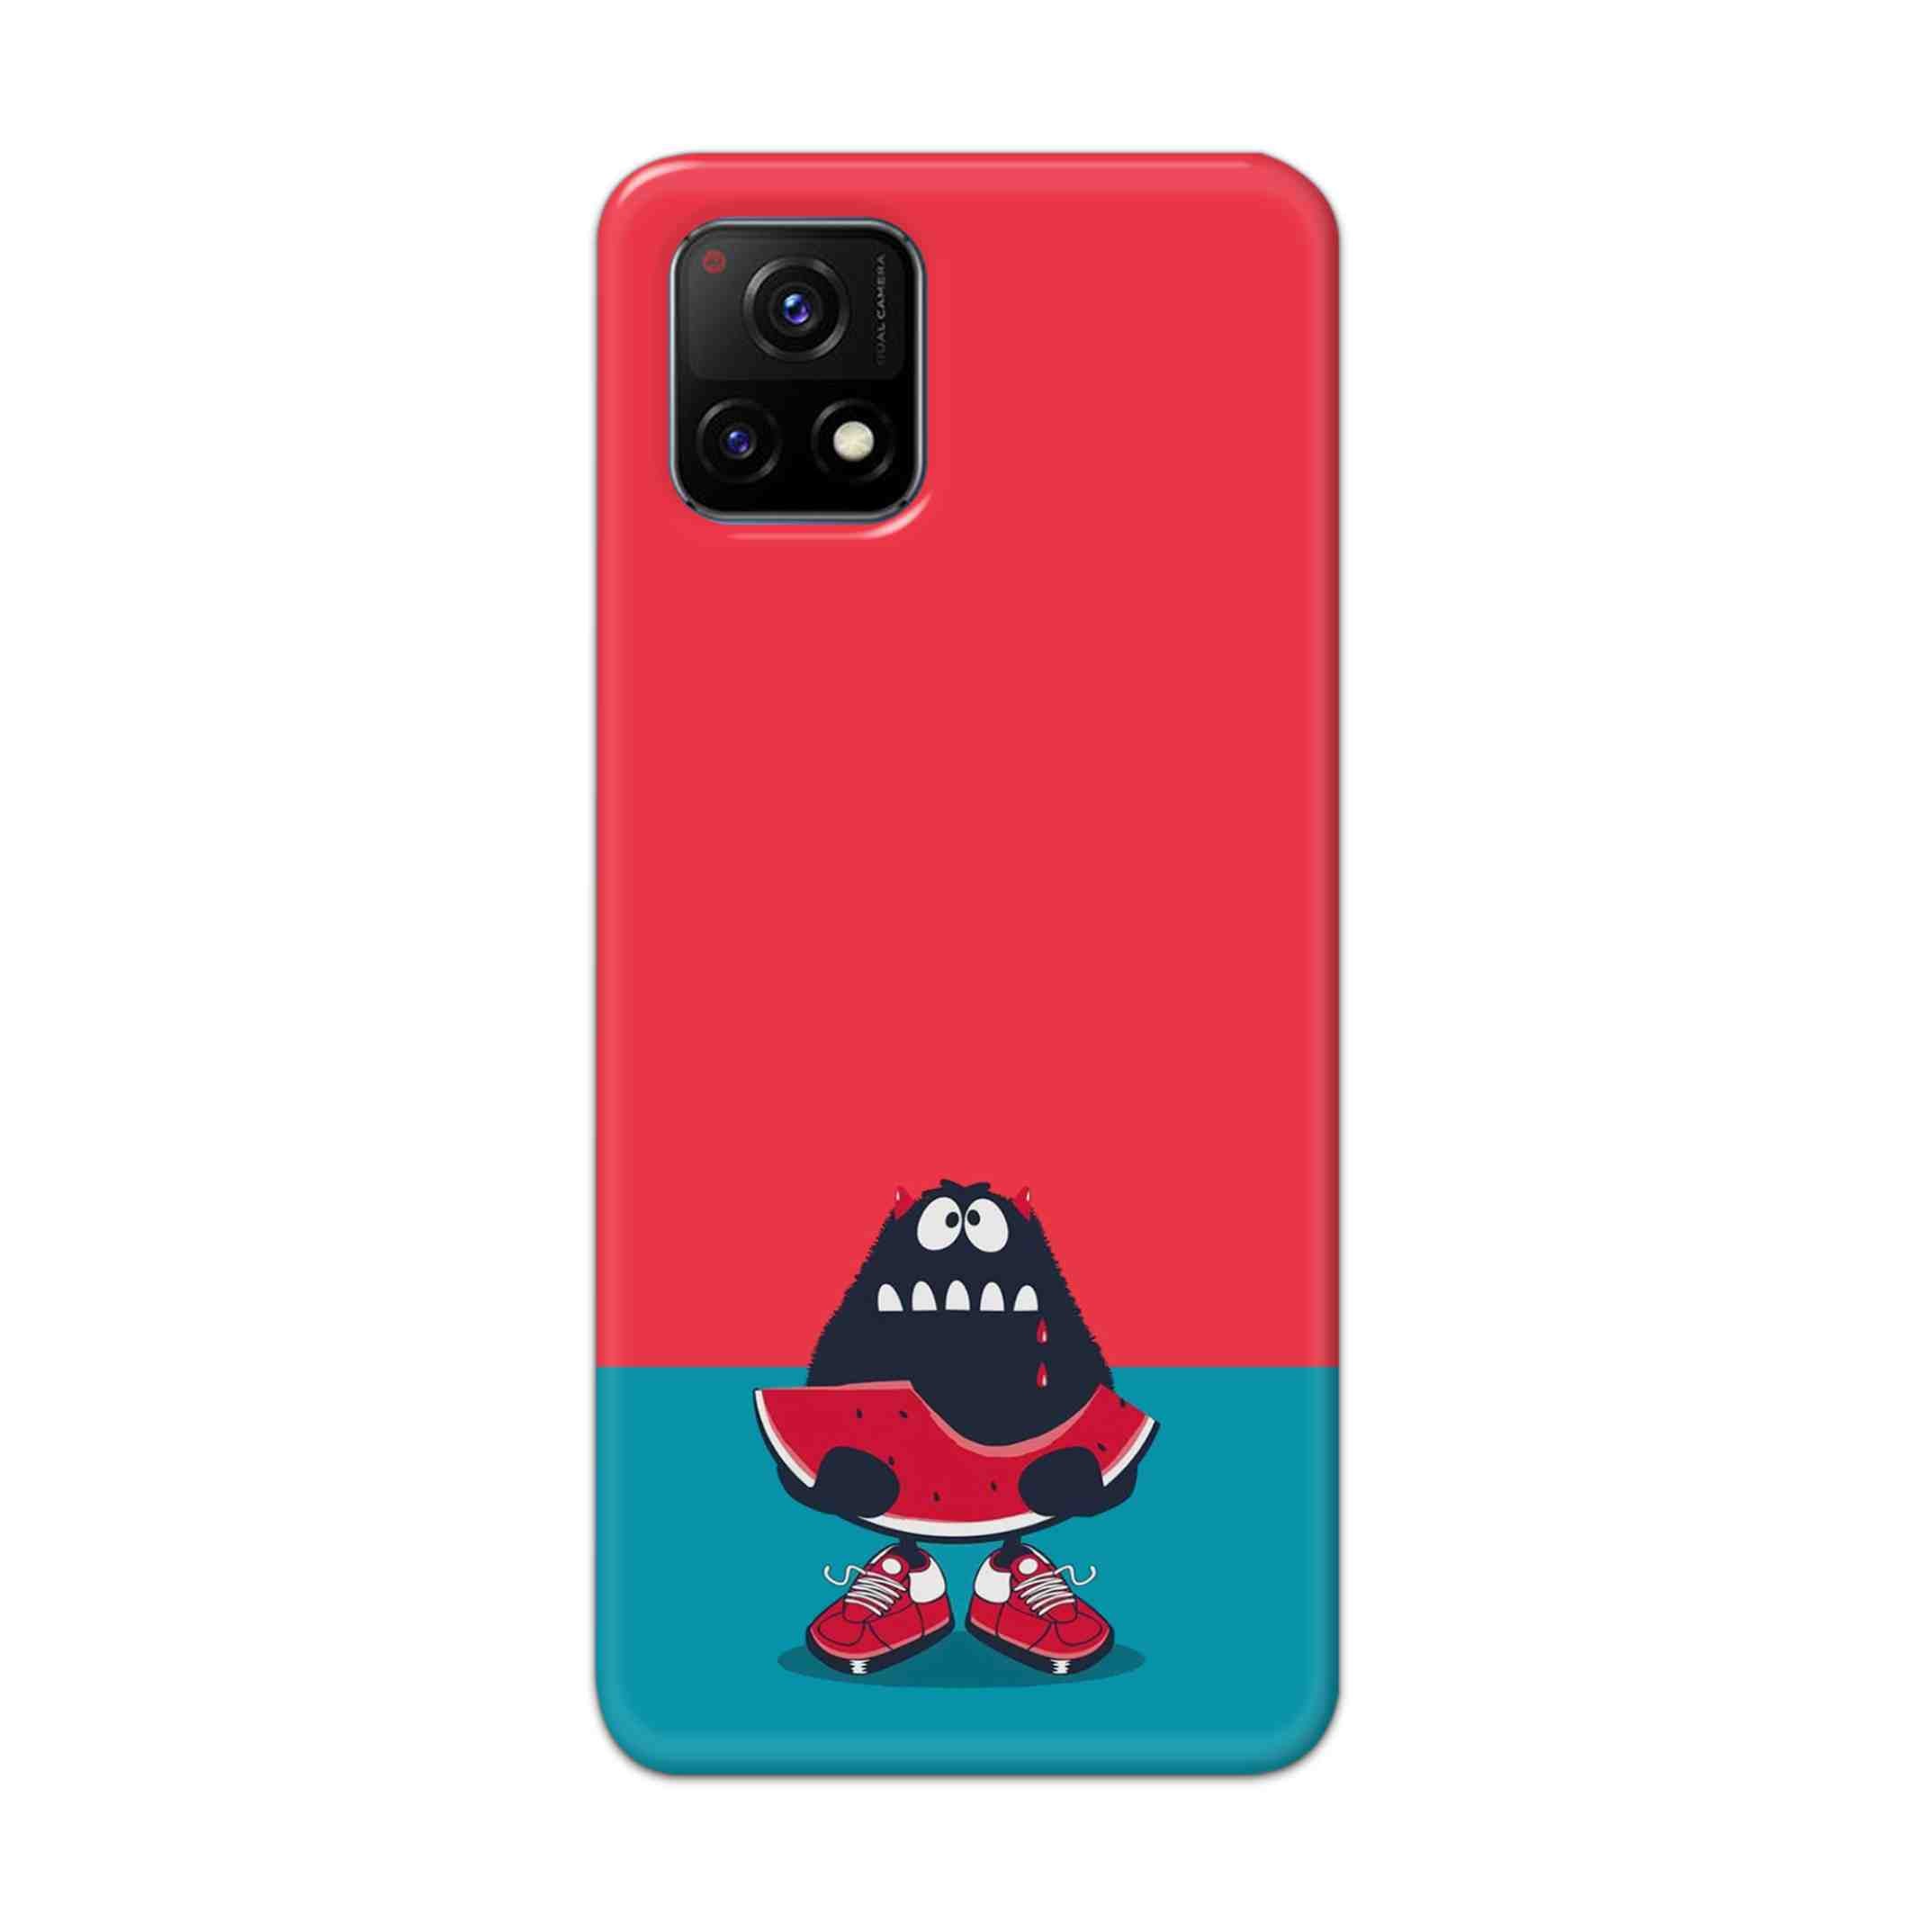 Buy Watermelon Hard Back Mobile Phone Case Cover For Vivo Y72 5G Online